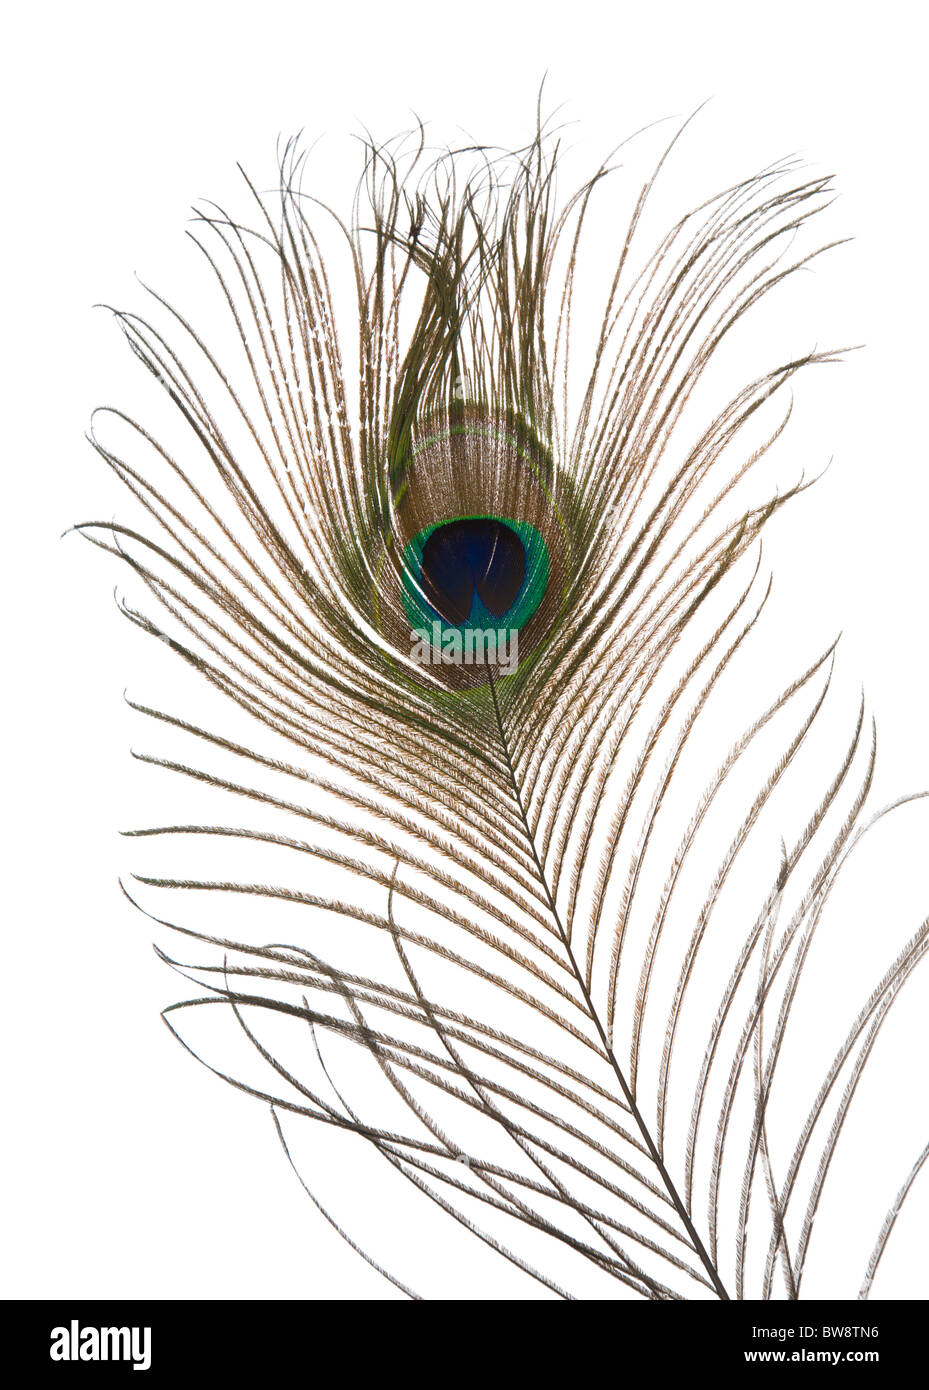 single peacock feather isolated on white background; Stock Photo